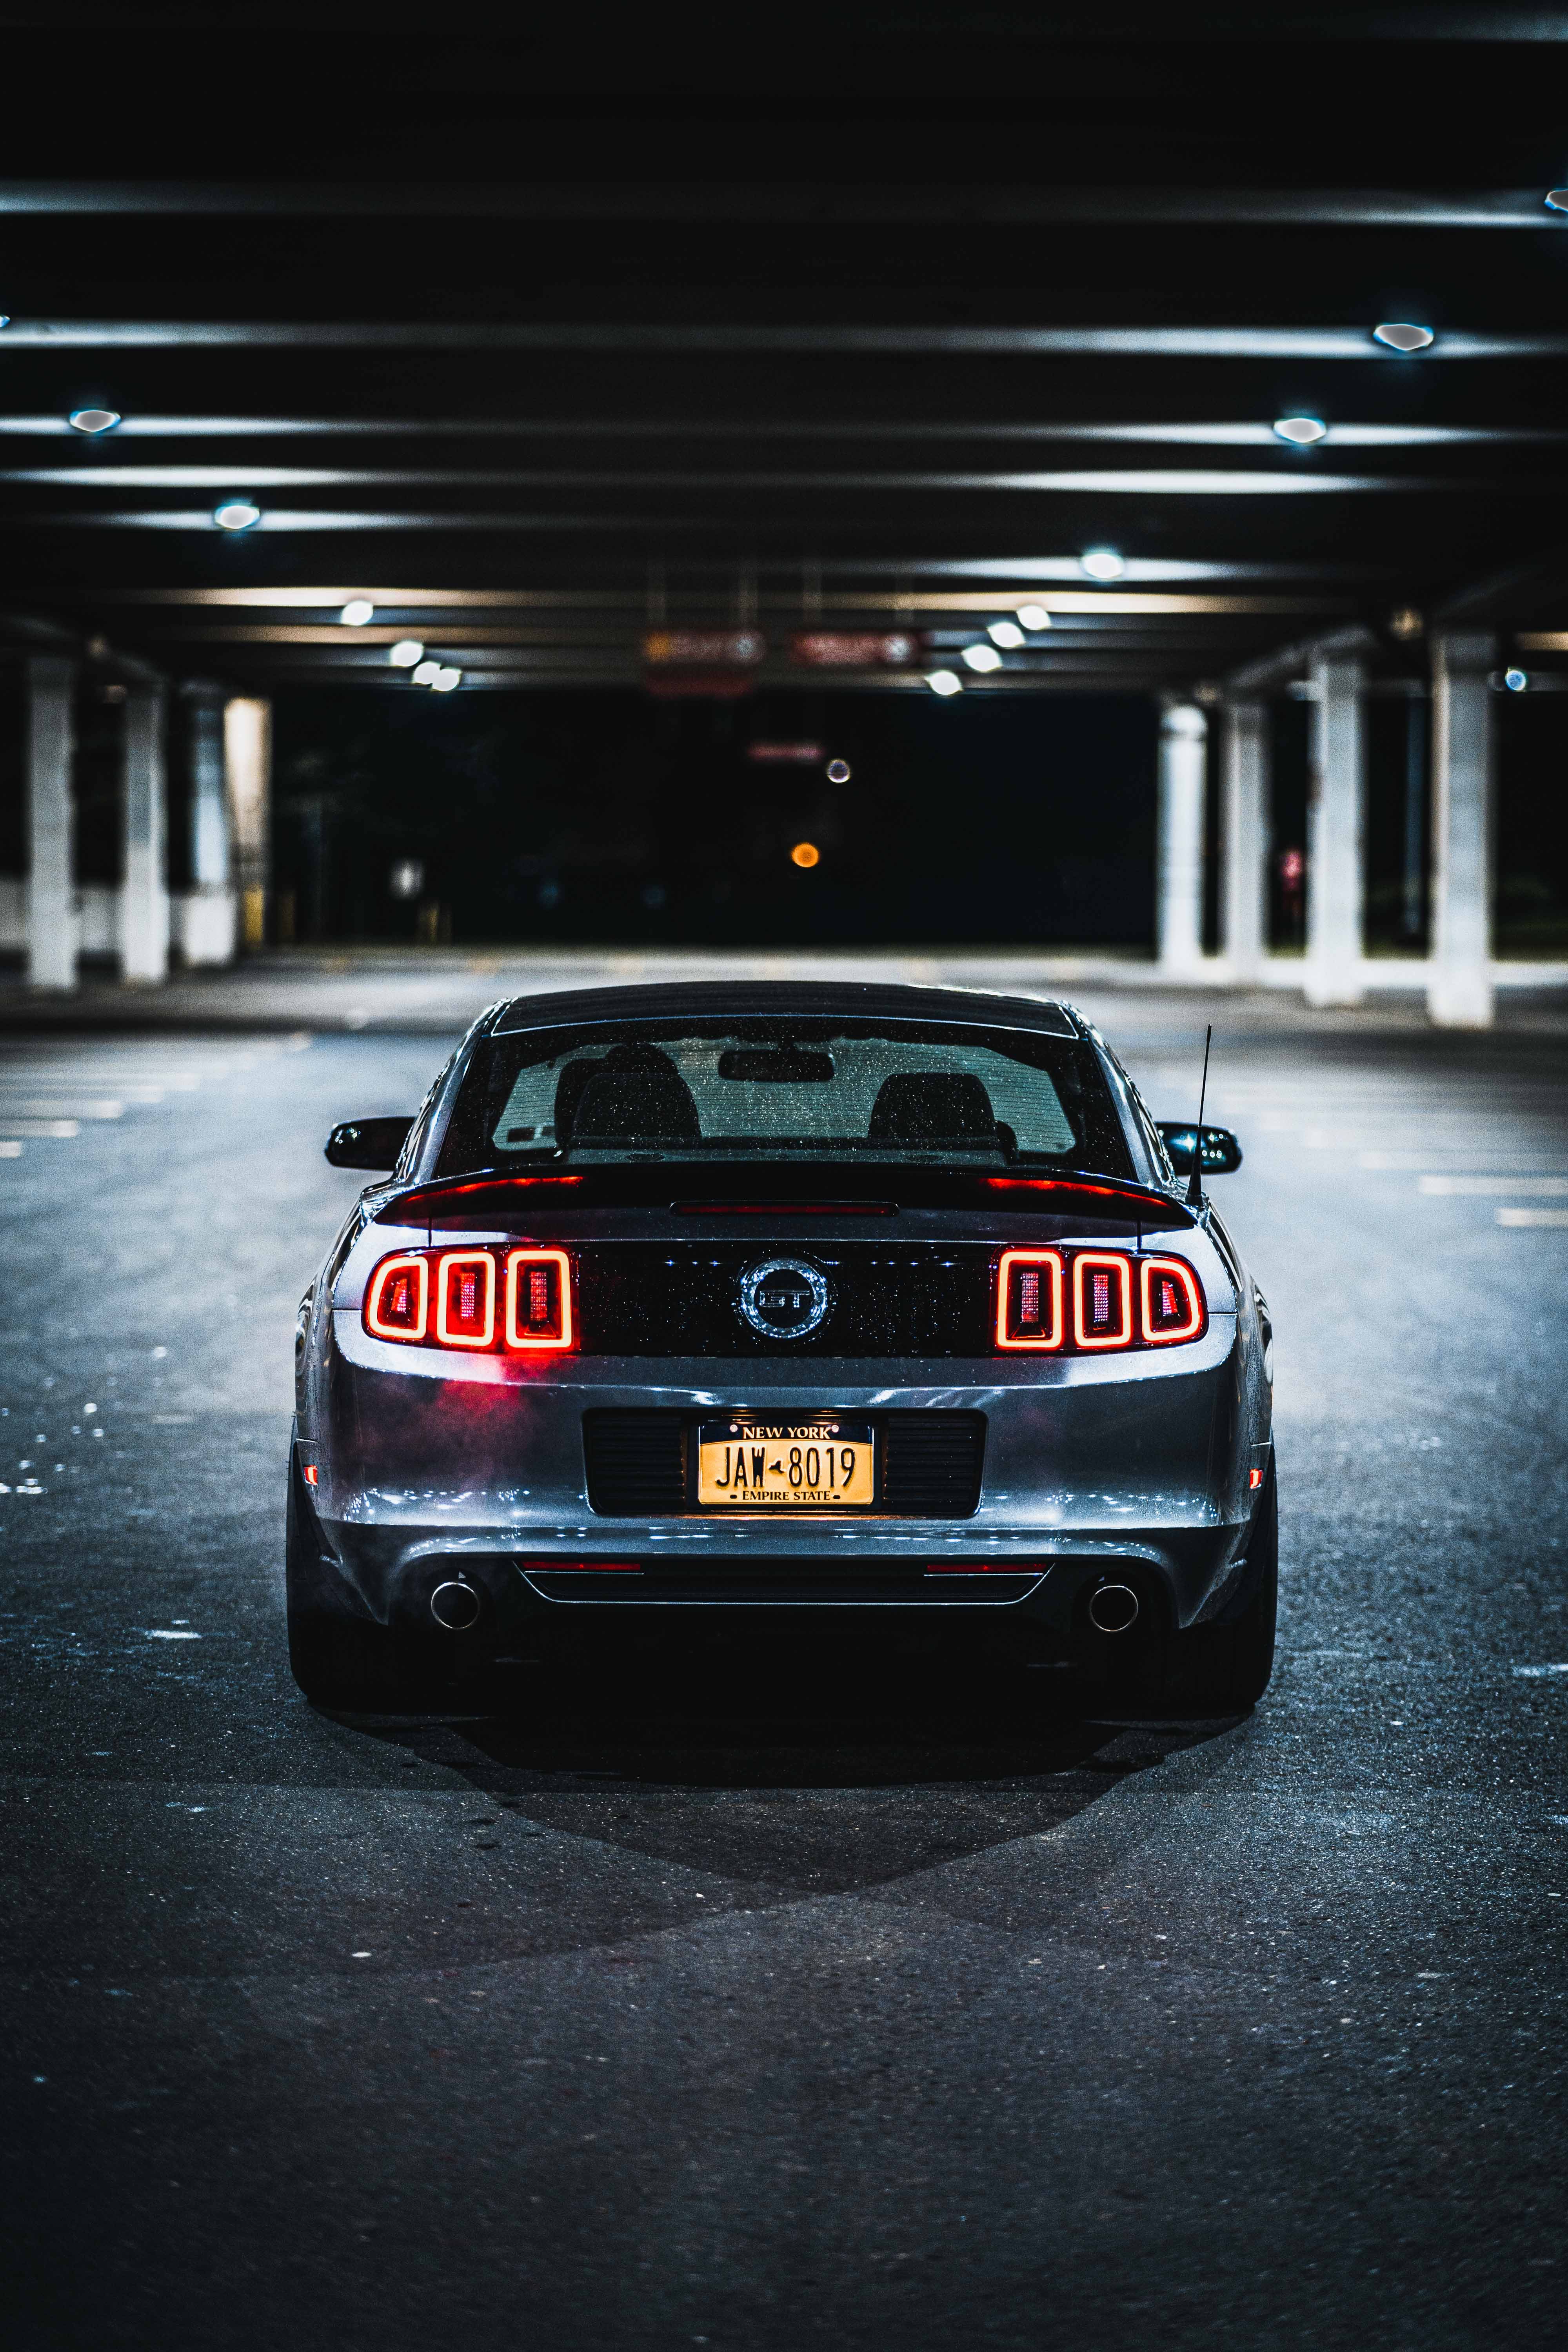 ford mustang, ford mustang gt, lights, cars, back view, rear view, headlights